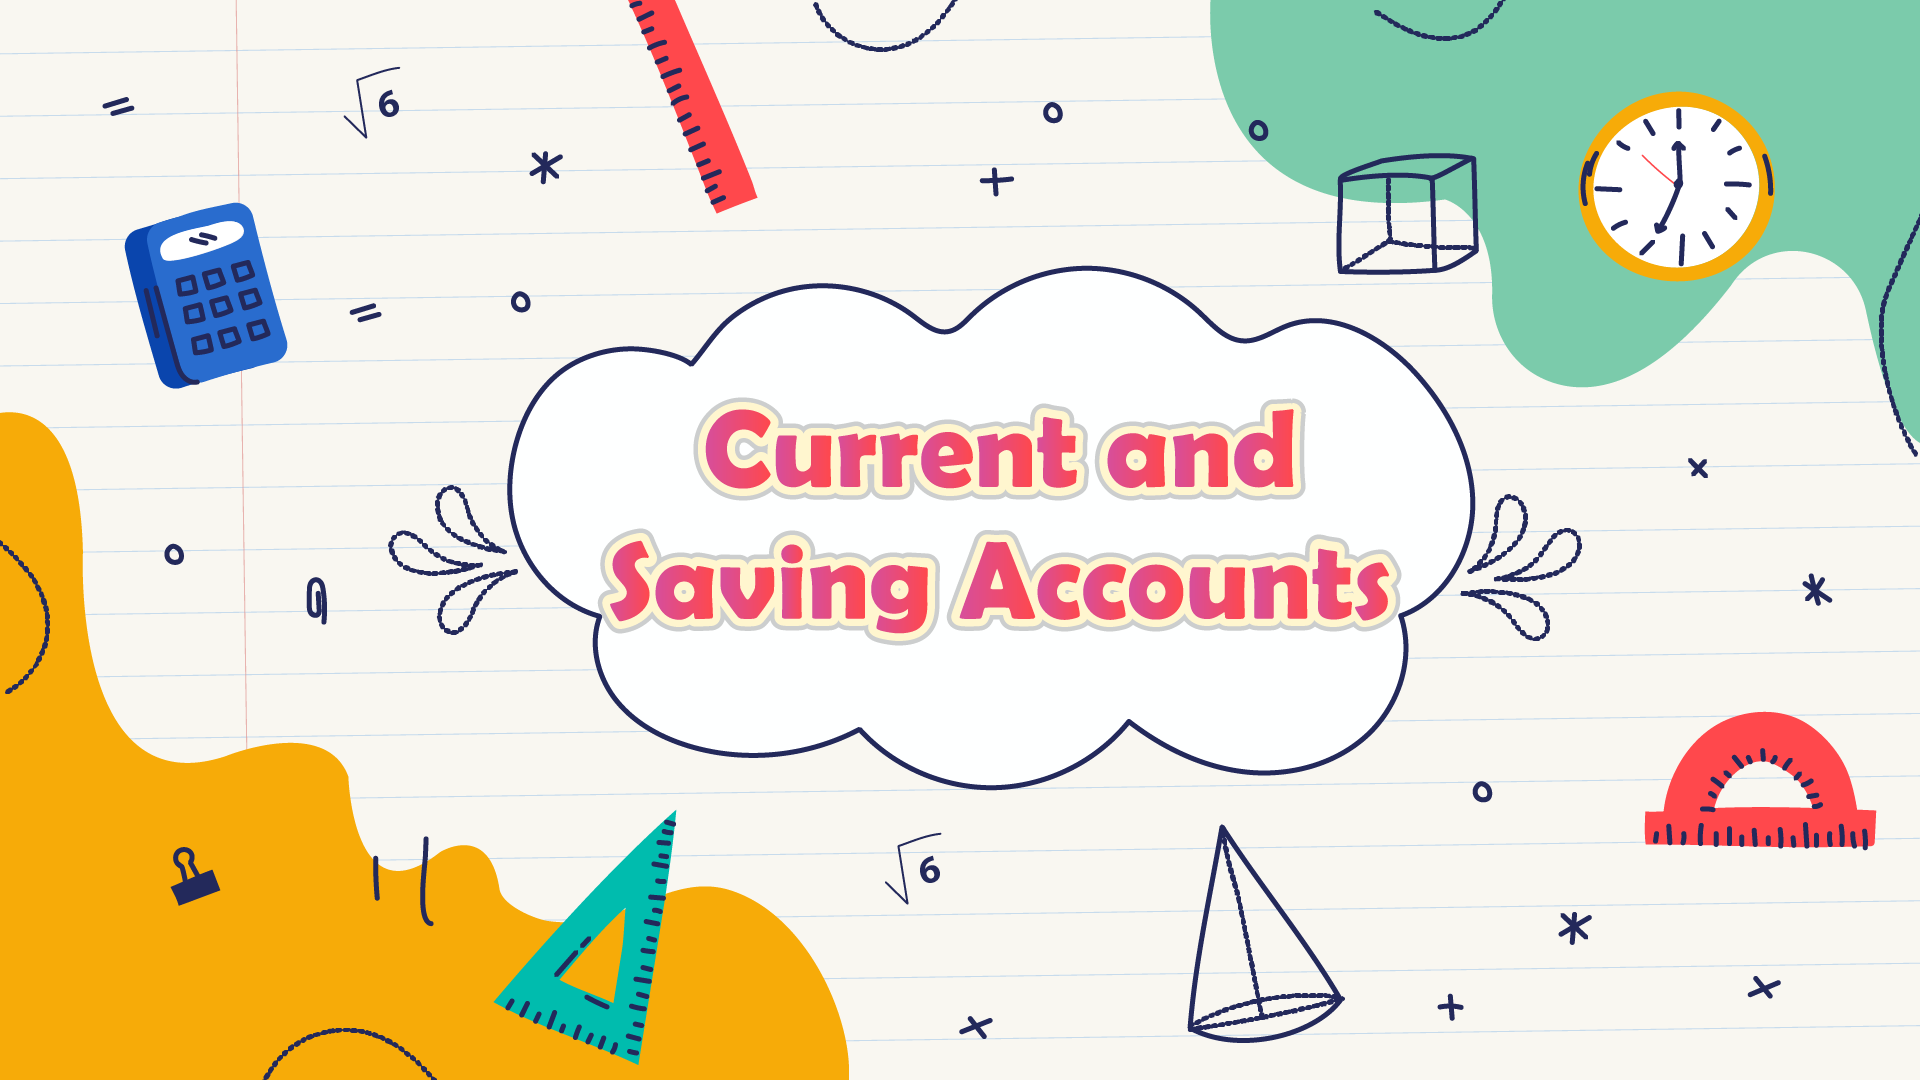 Current and Saving Accounts